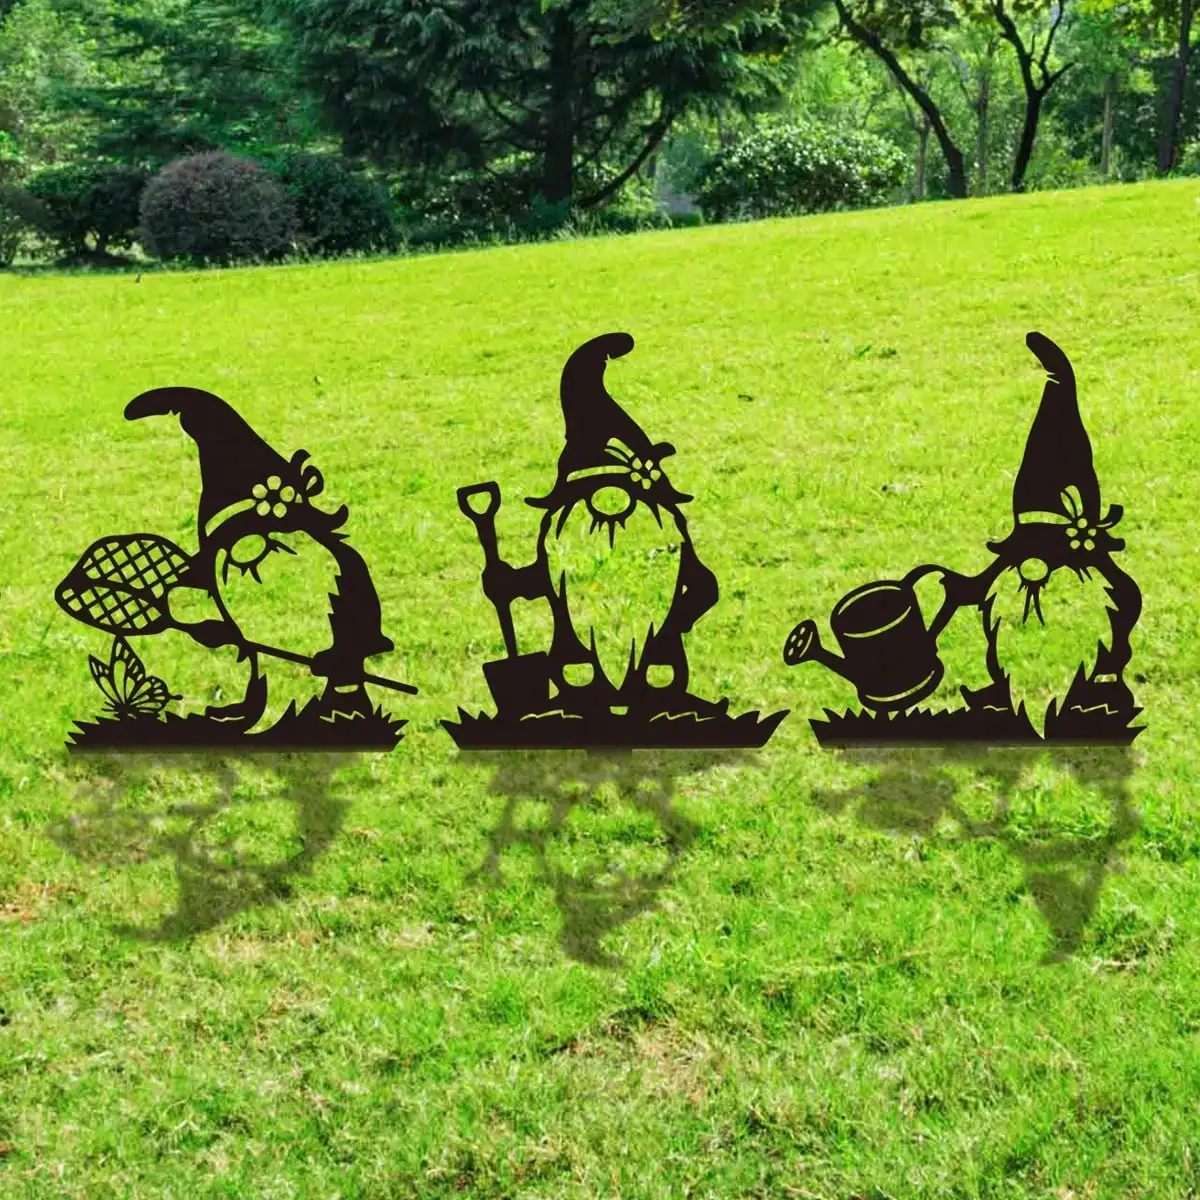 

1PC Metal Black gnome Garden Stakes Decoration Cute gnome Garden Decorative Outdoor Statues For gnome Lovers Yard Garden